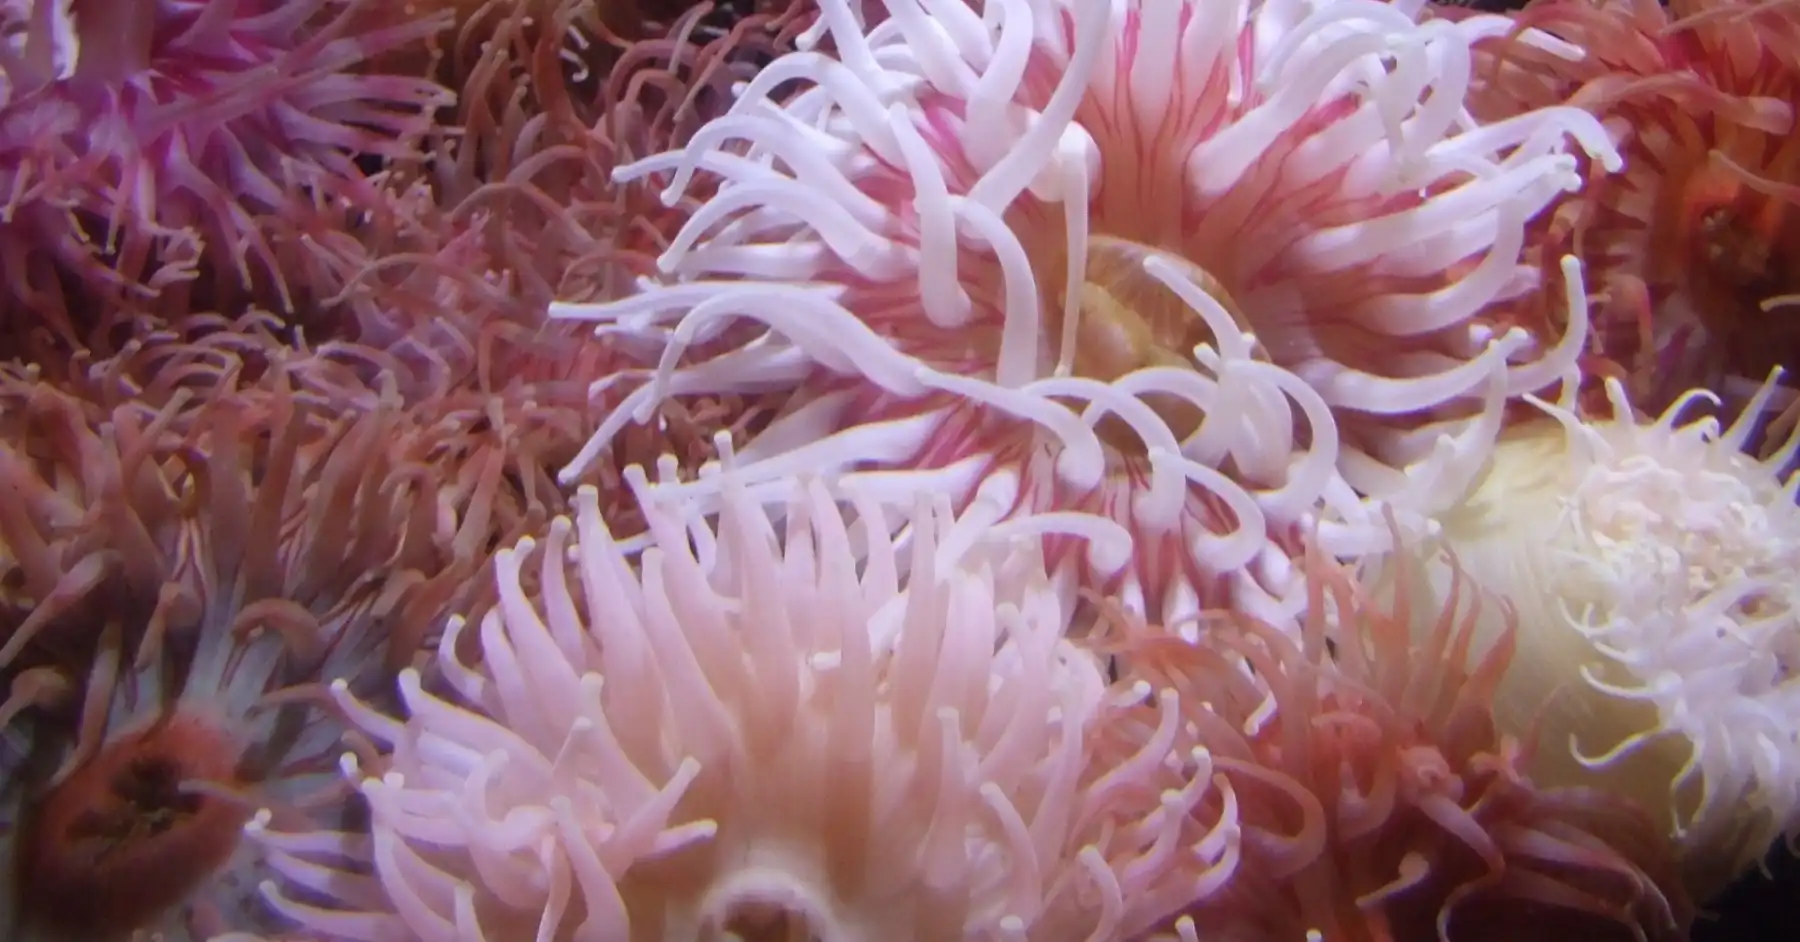 Majano Anemone Identification and What they eat